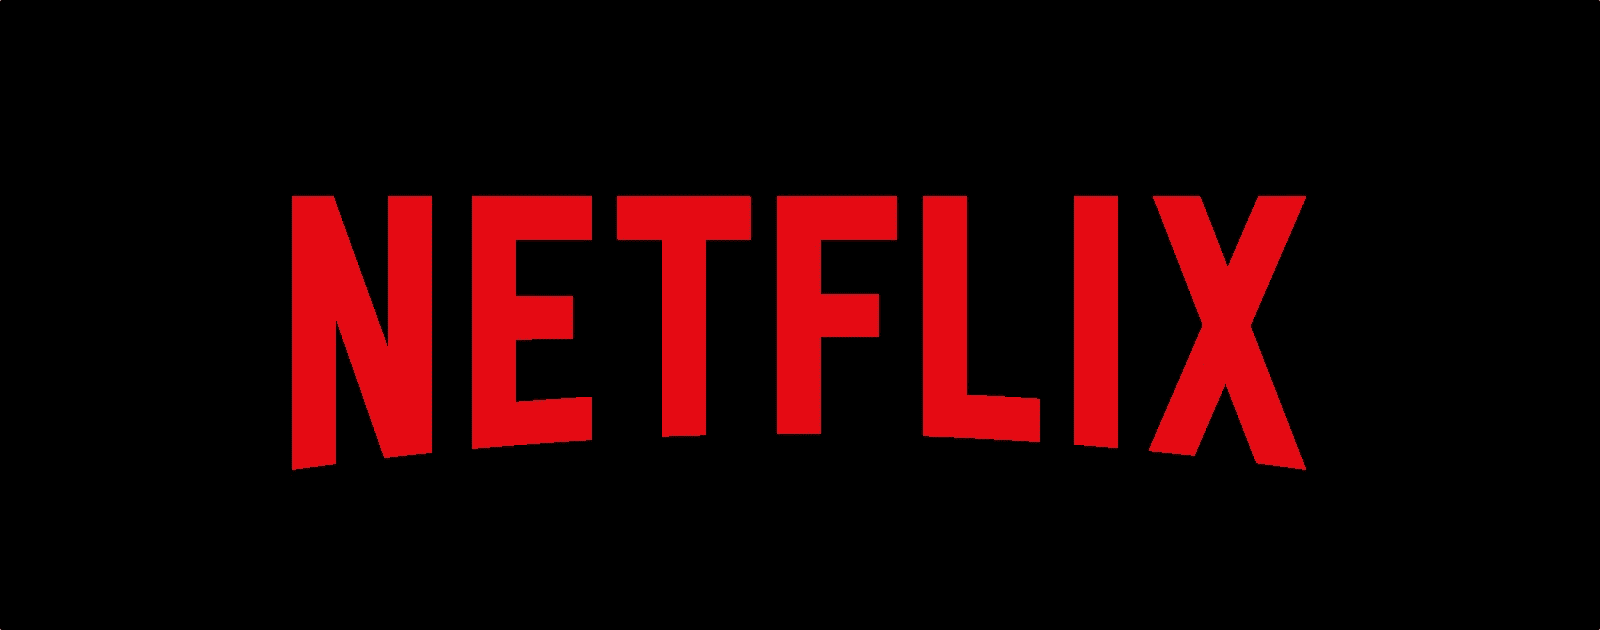 Netflix CEO Confirms Content Will Not be Available on Apple Streaming Service